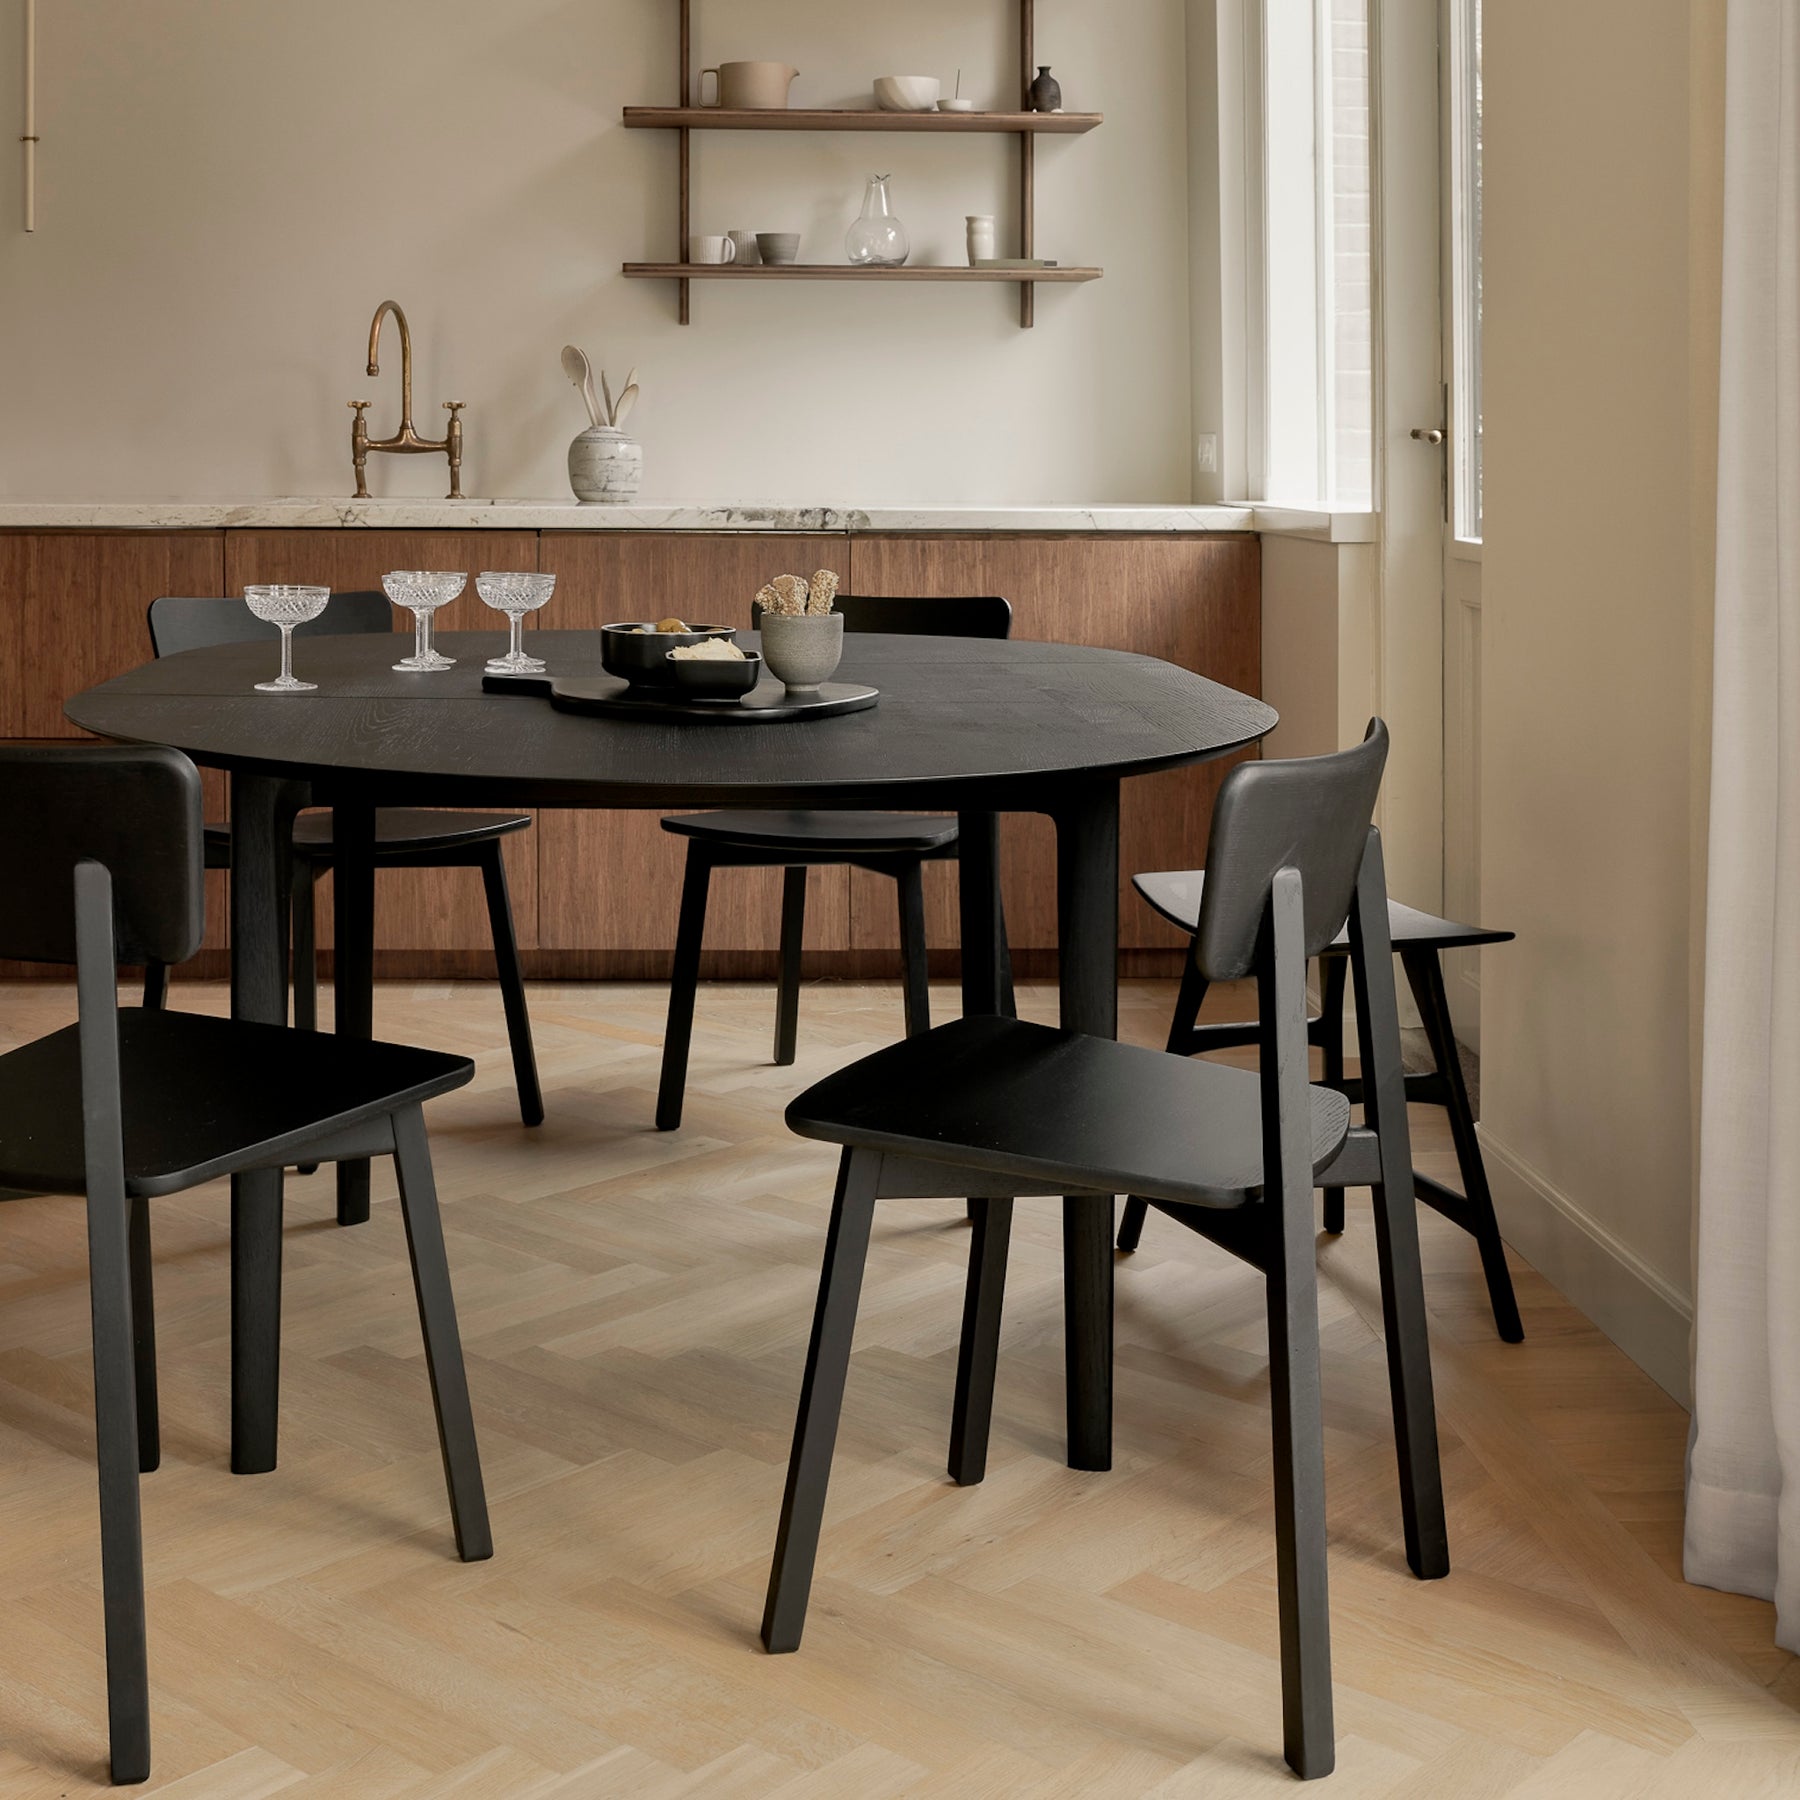 Ethnicraft Black Oak Bok Round Extendable Dining Table 51528 in Kitchen Extended into oval